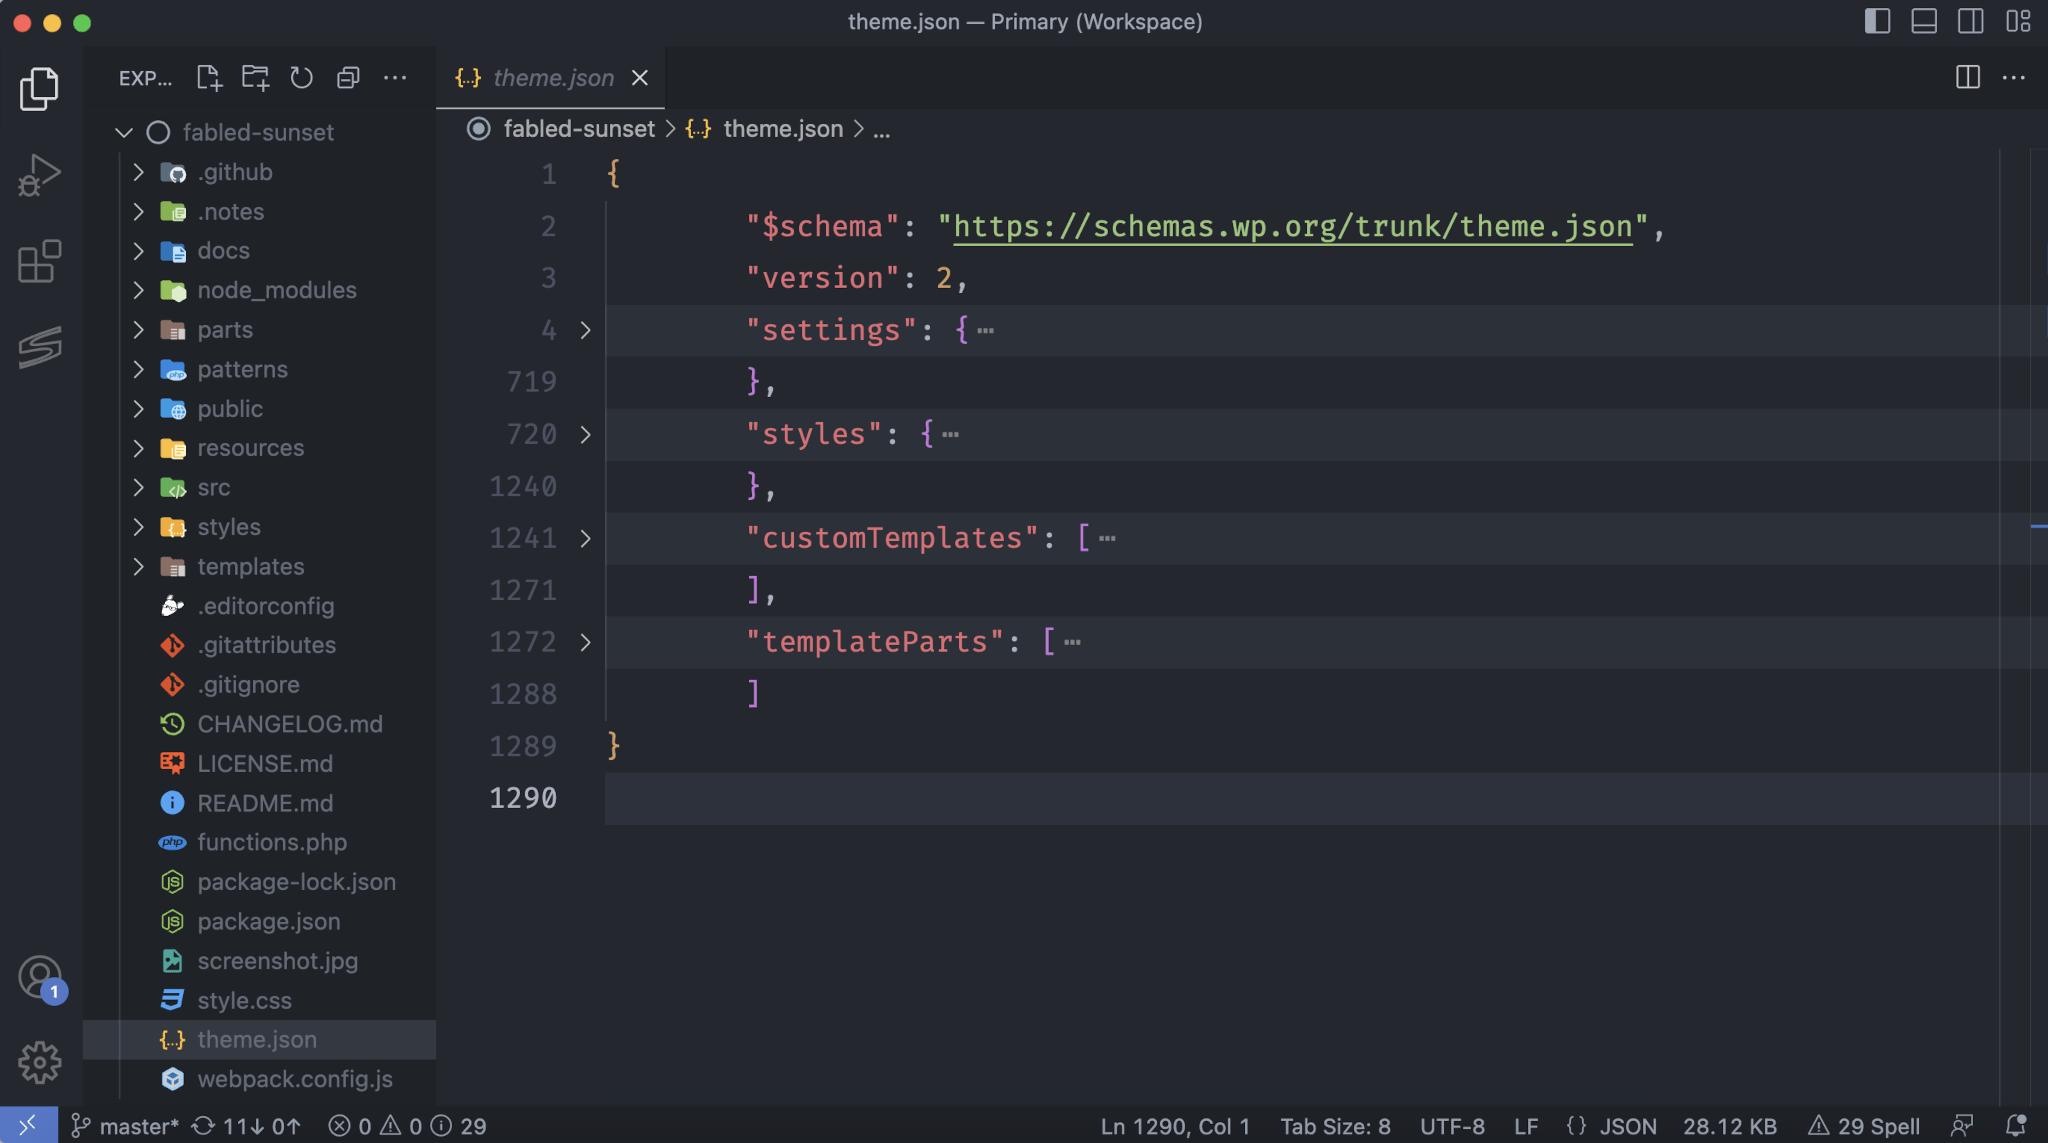 Visual Studio Code editor showing the structure of a theme